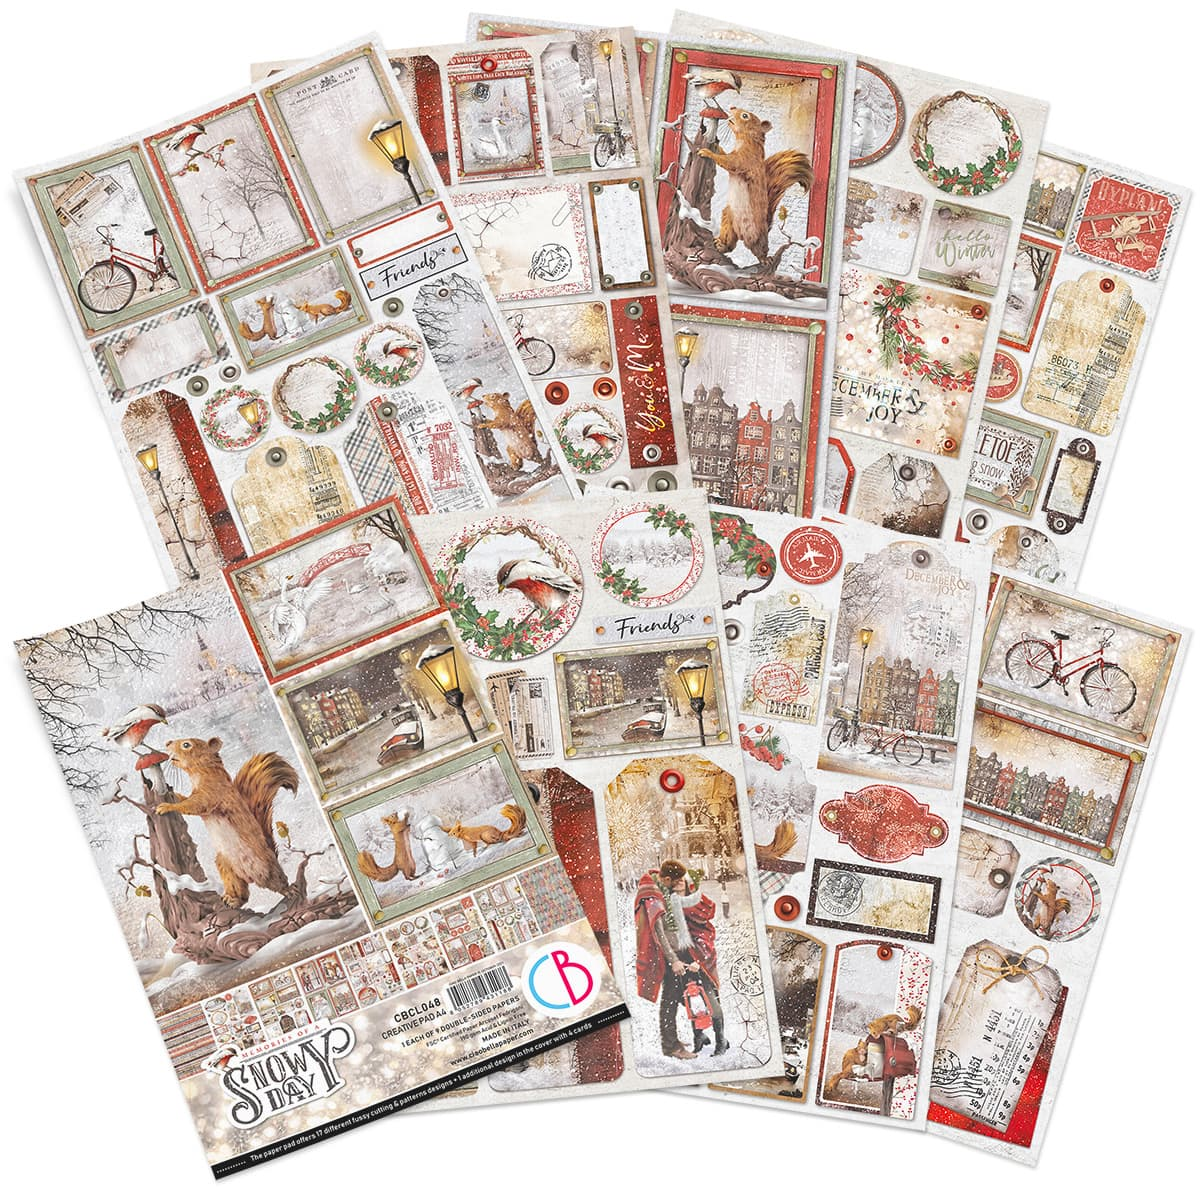 Ciao Bella Creative Pad A4 "Memories of a Snowy Day"